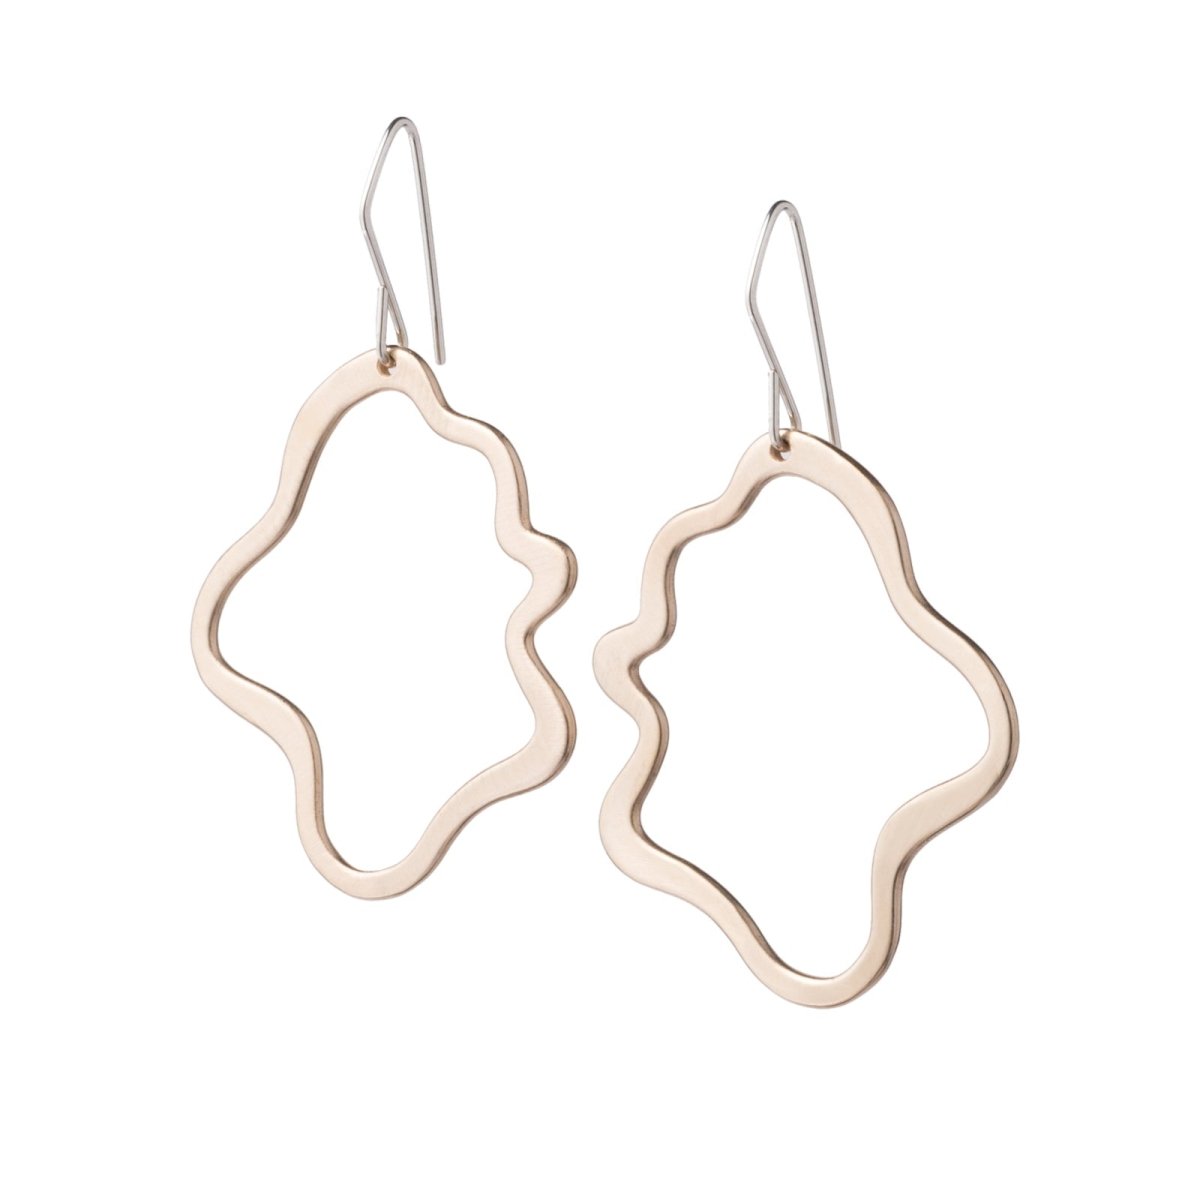 Thin, bronze wire with a brushed finish, formed into a playful, oblong shape with wavy edges, and dangling from sterling silver-filled earring wires.